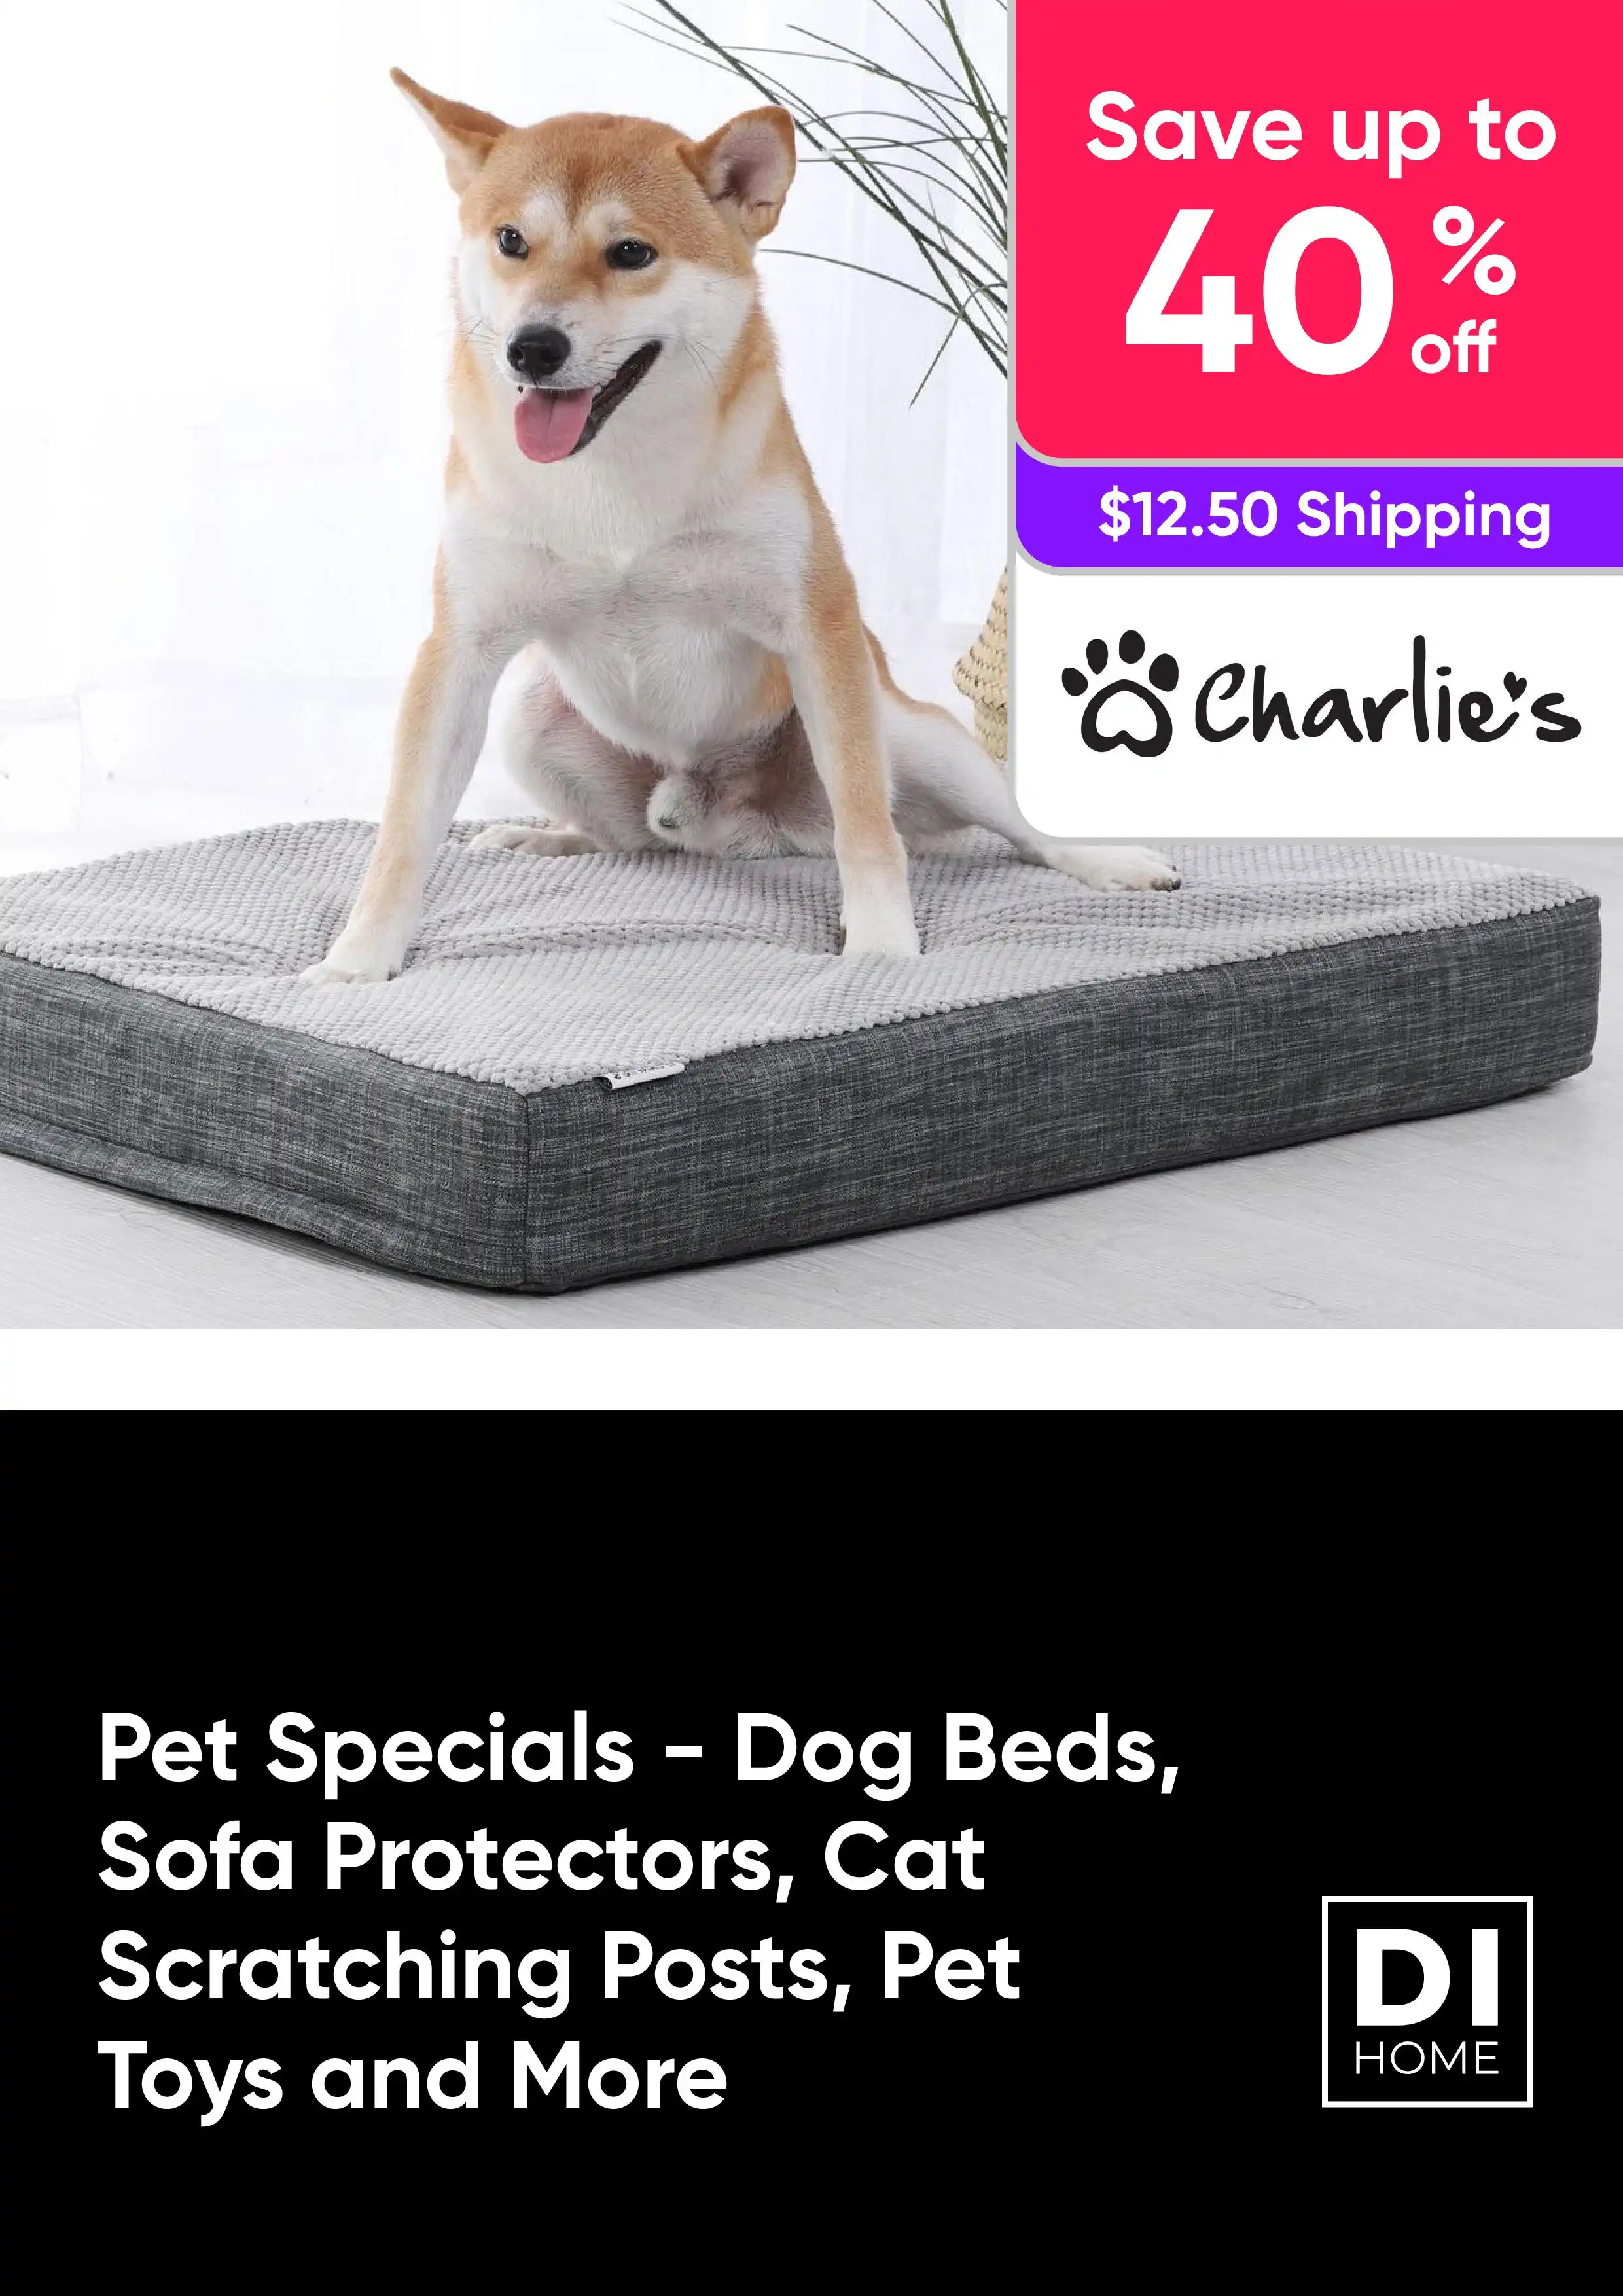 Pet Specials - Dog Beds, Sofa Protectors, Cat Scratching Posts, Pet Toys and More - Save up to 40% off